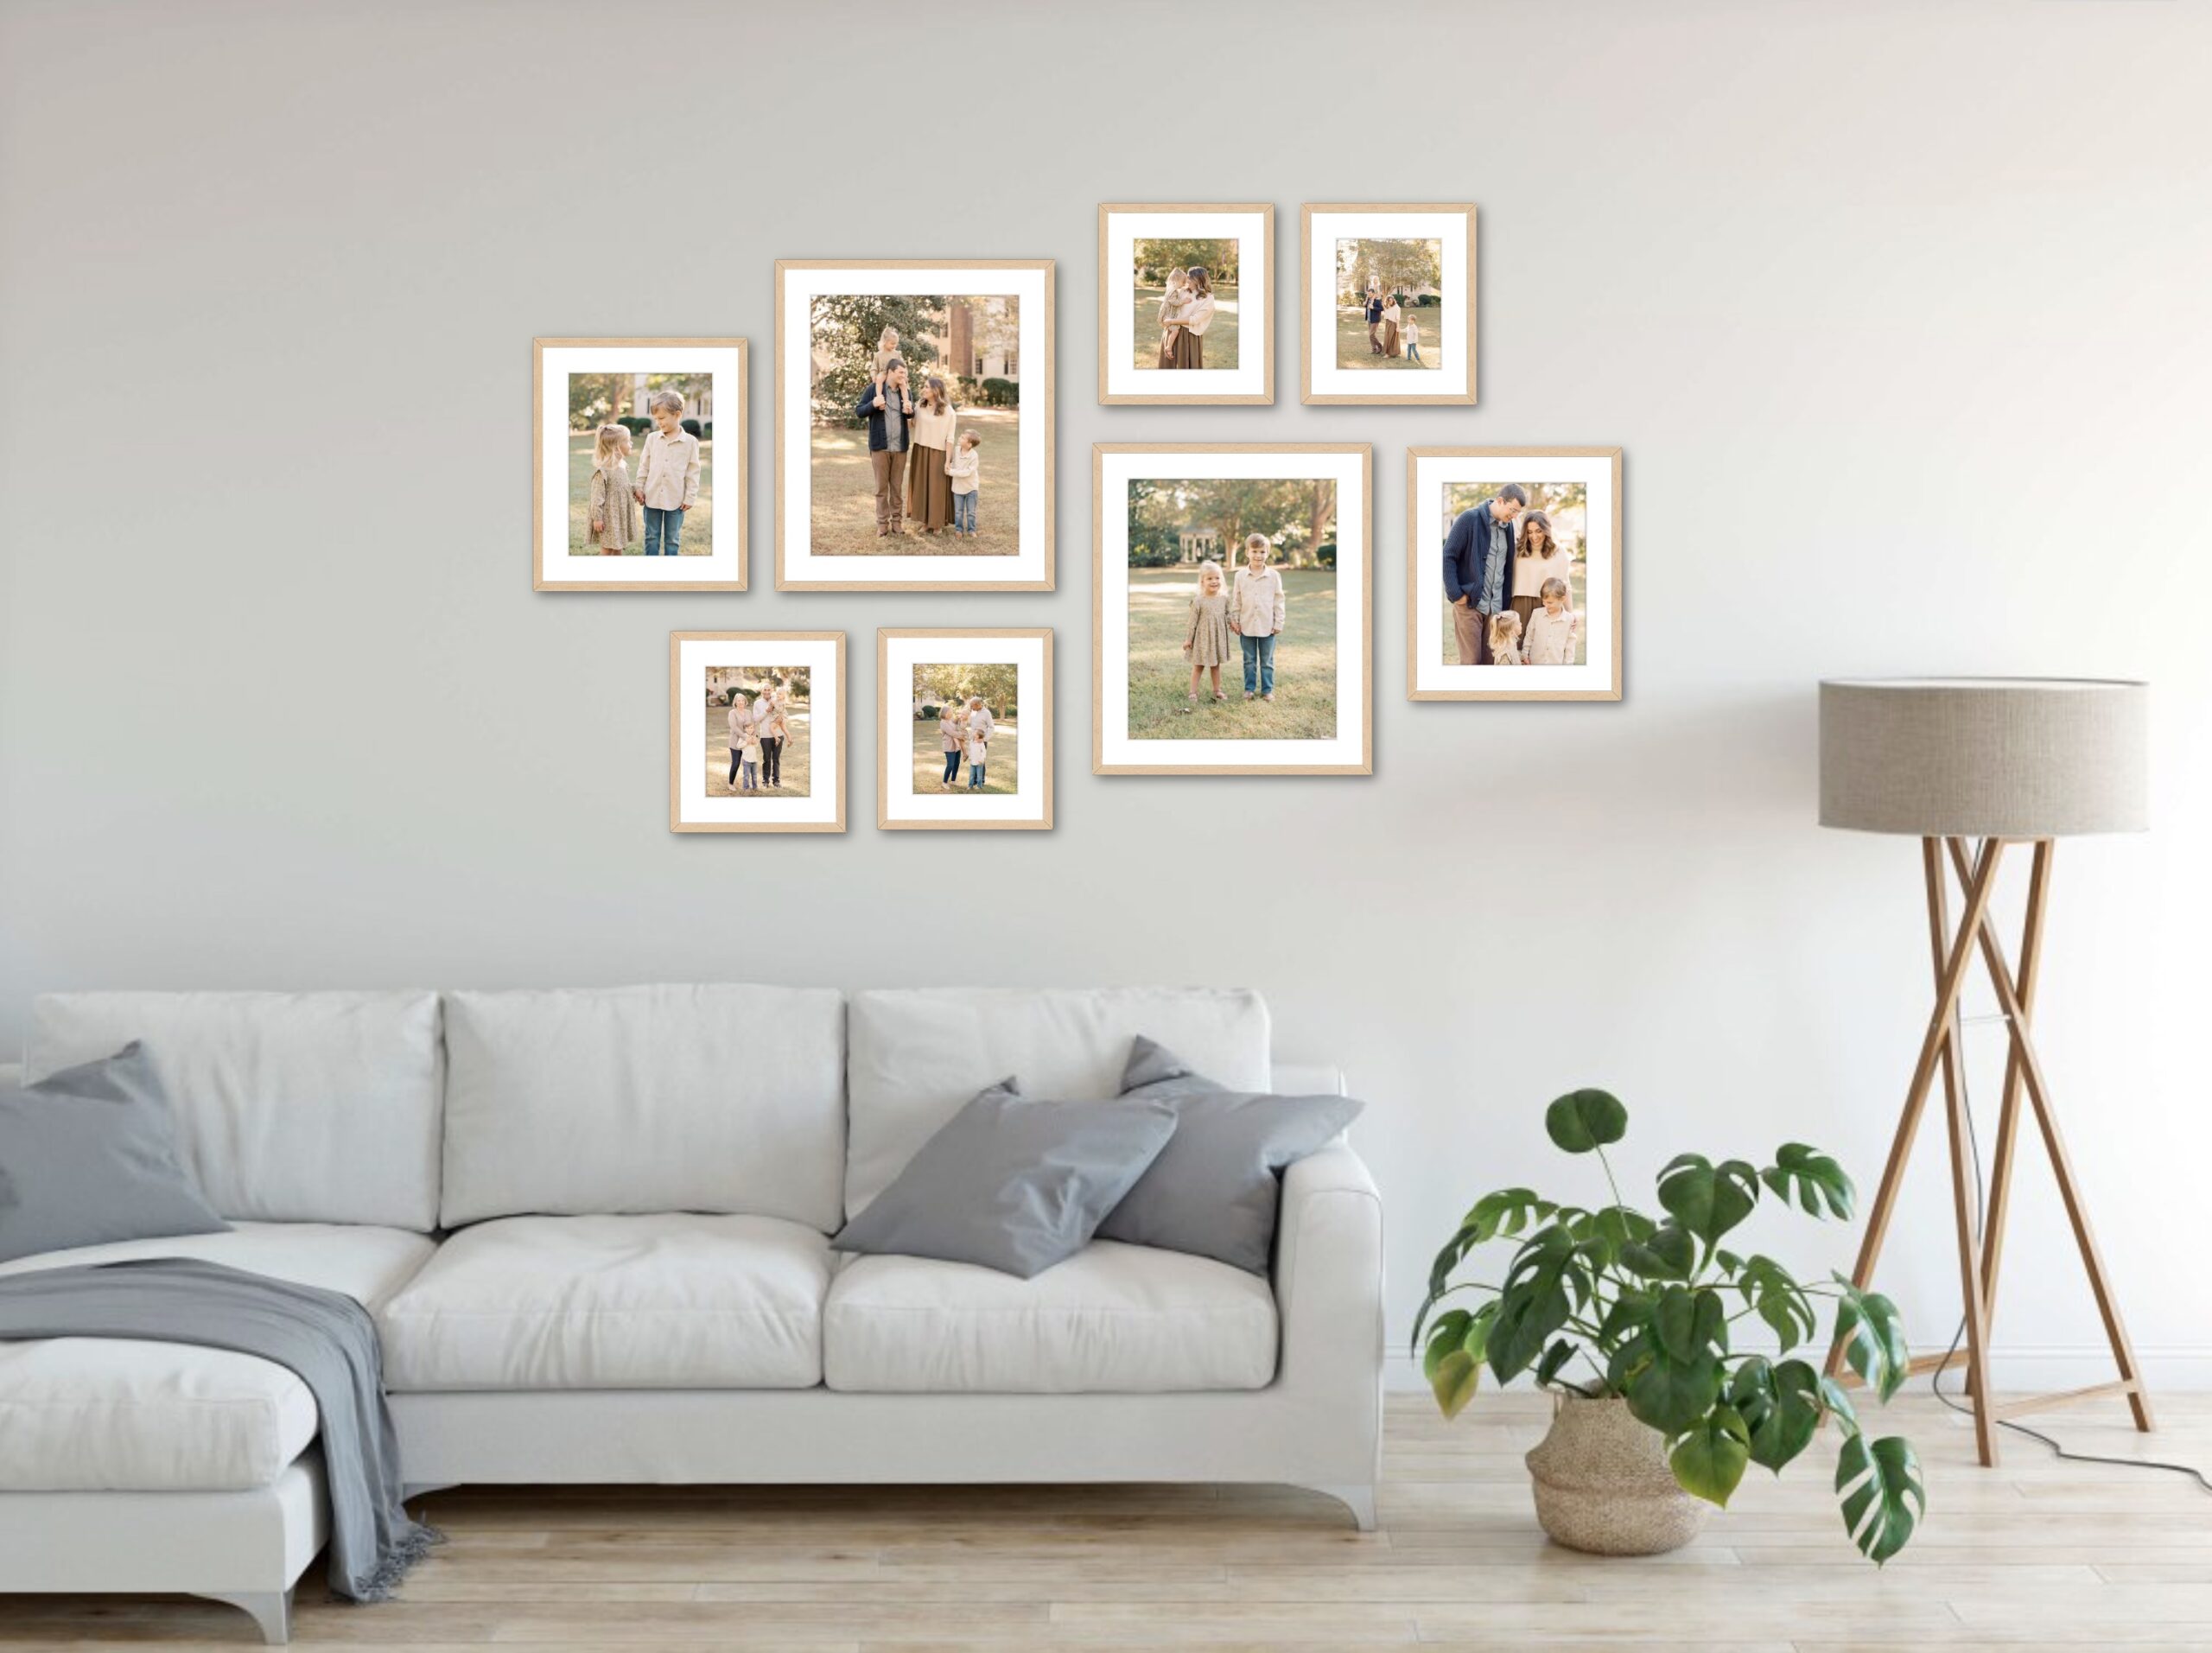 8 piece gallery wall ideas for your home by Raleigh family photographer A.J. Dunlap Photography.